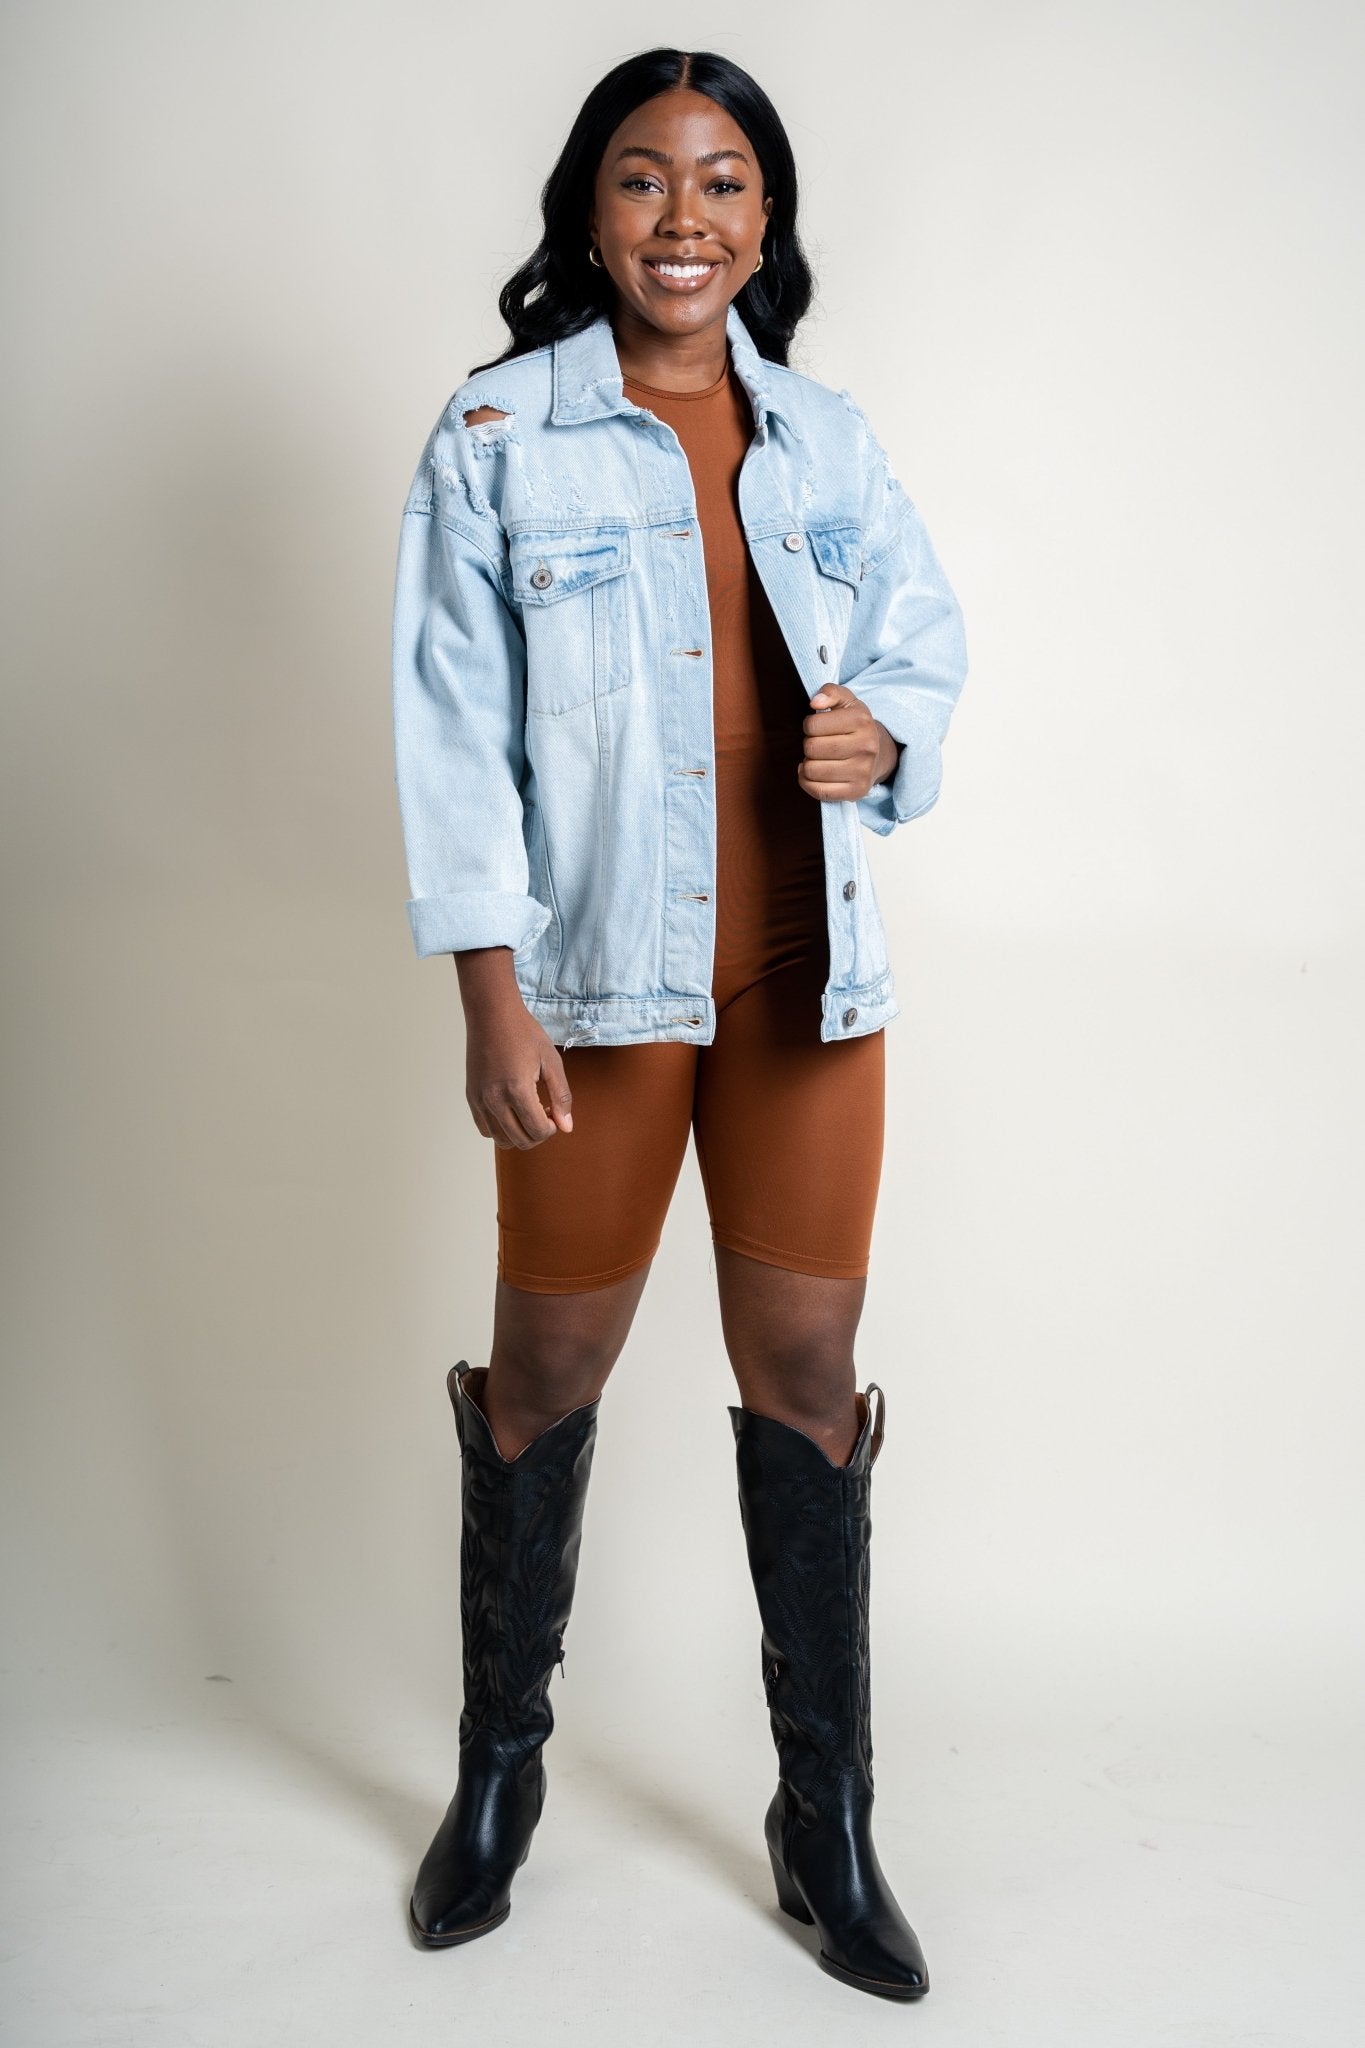 Zip back biker romper brown - Trendy Romper - Fashion Rompers & Pantsuits at Lush Fashion Lounge Boutique in Oklahoma City